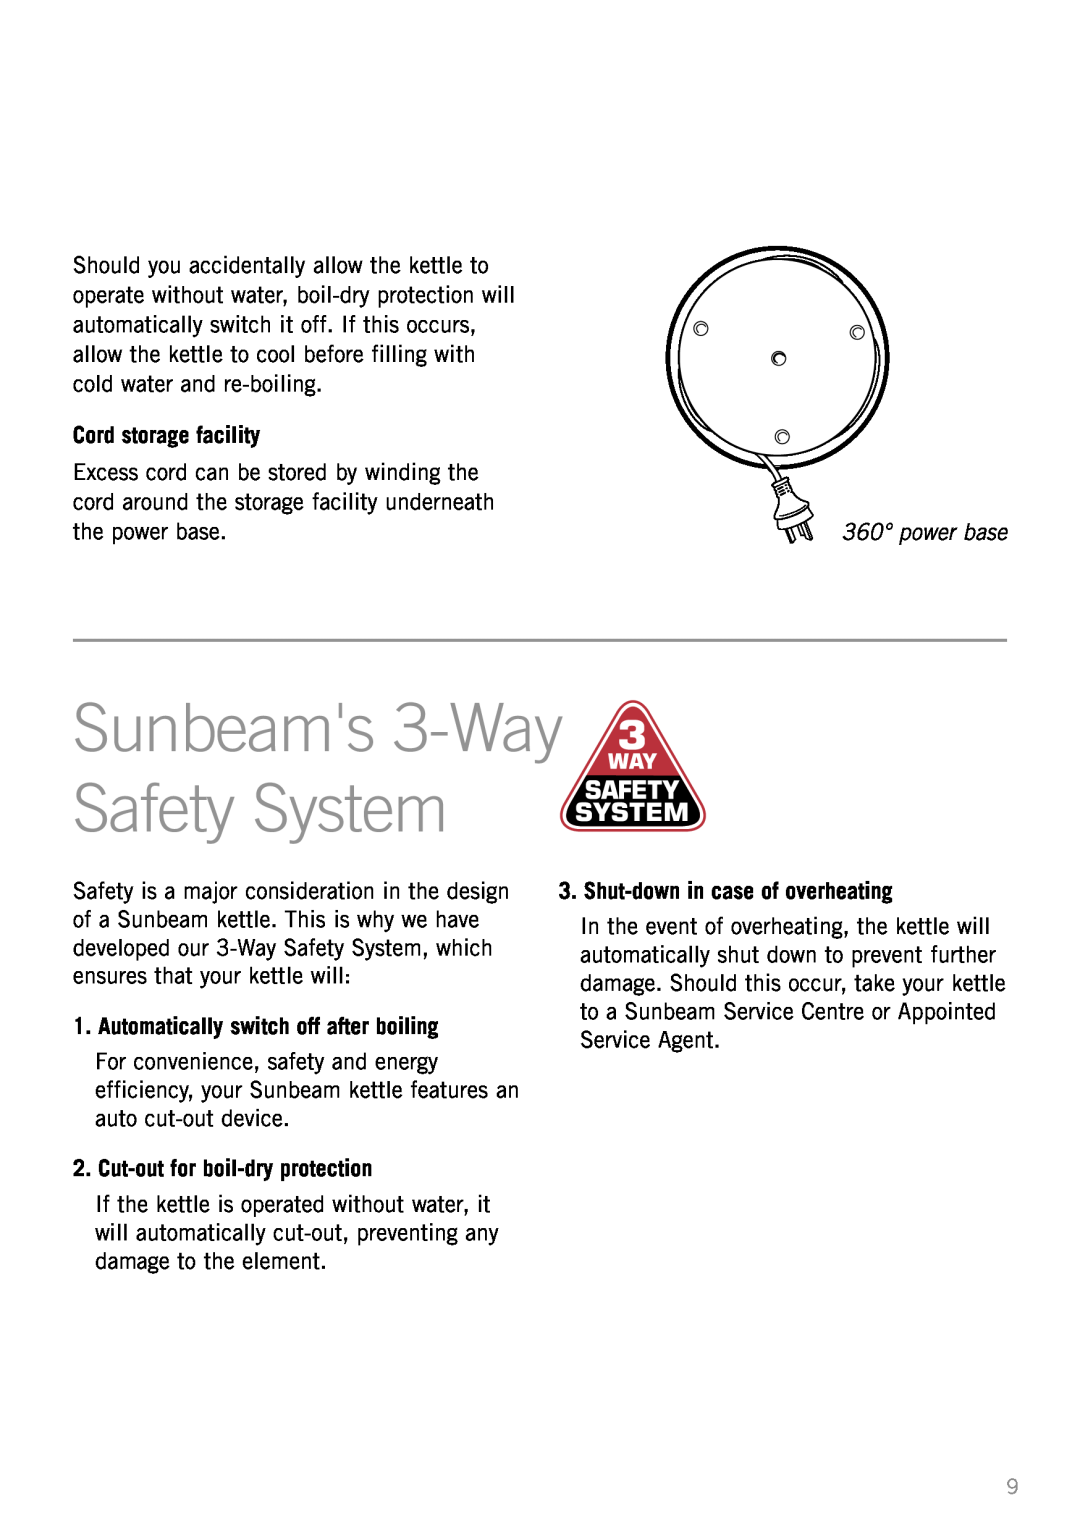 Sunbeam KE5300 manual Sunbeams 3-Way Safety System, Automatically switch off after boiling, Cut-outfor boil-dryprotection 